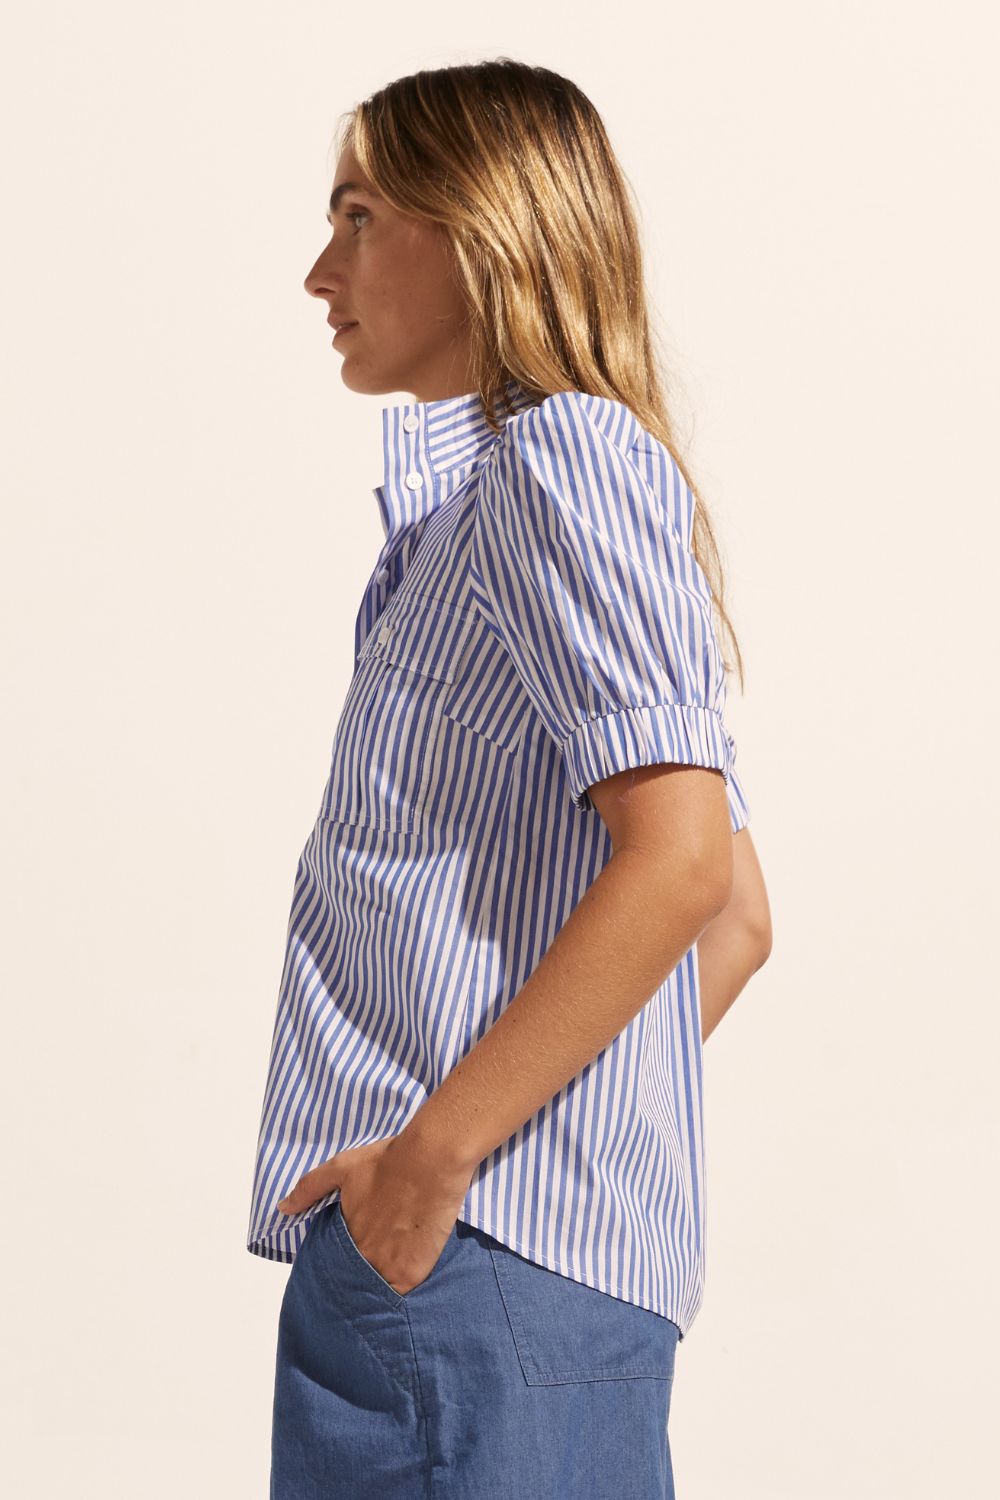 blue and white stripe, high neck, button down, mid length sleeve, curved hem, shirt, side image